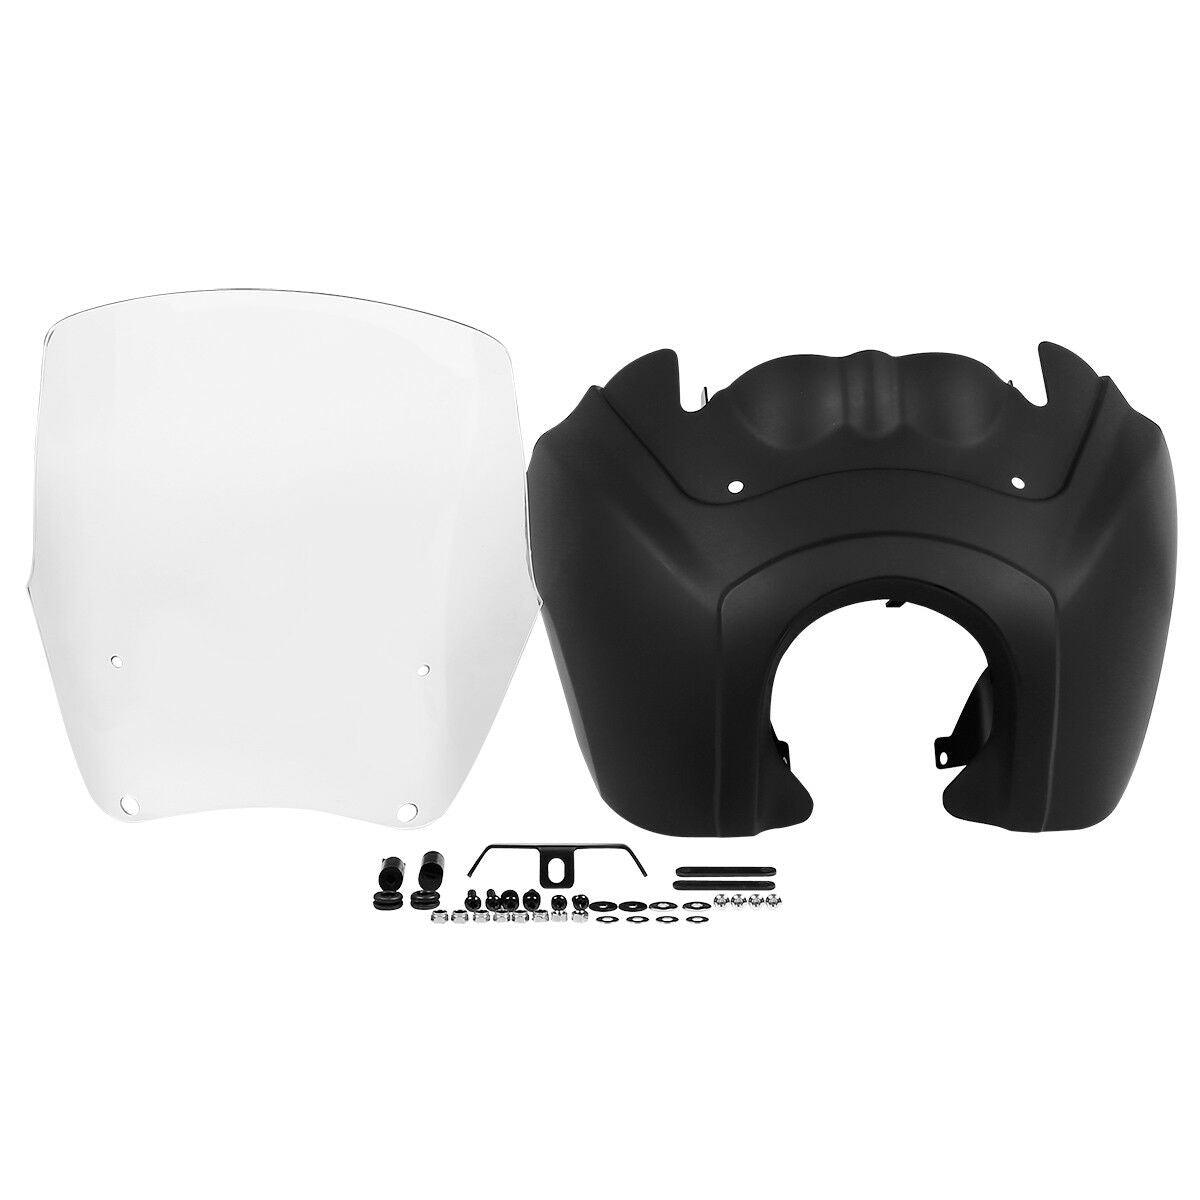 Front Upper Fairing w/ 15" Windshield For Harley Dyna Street Bob FXDB 2006-2017 - Moto Life Products